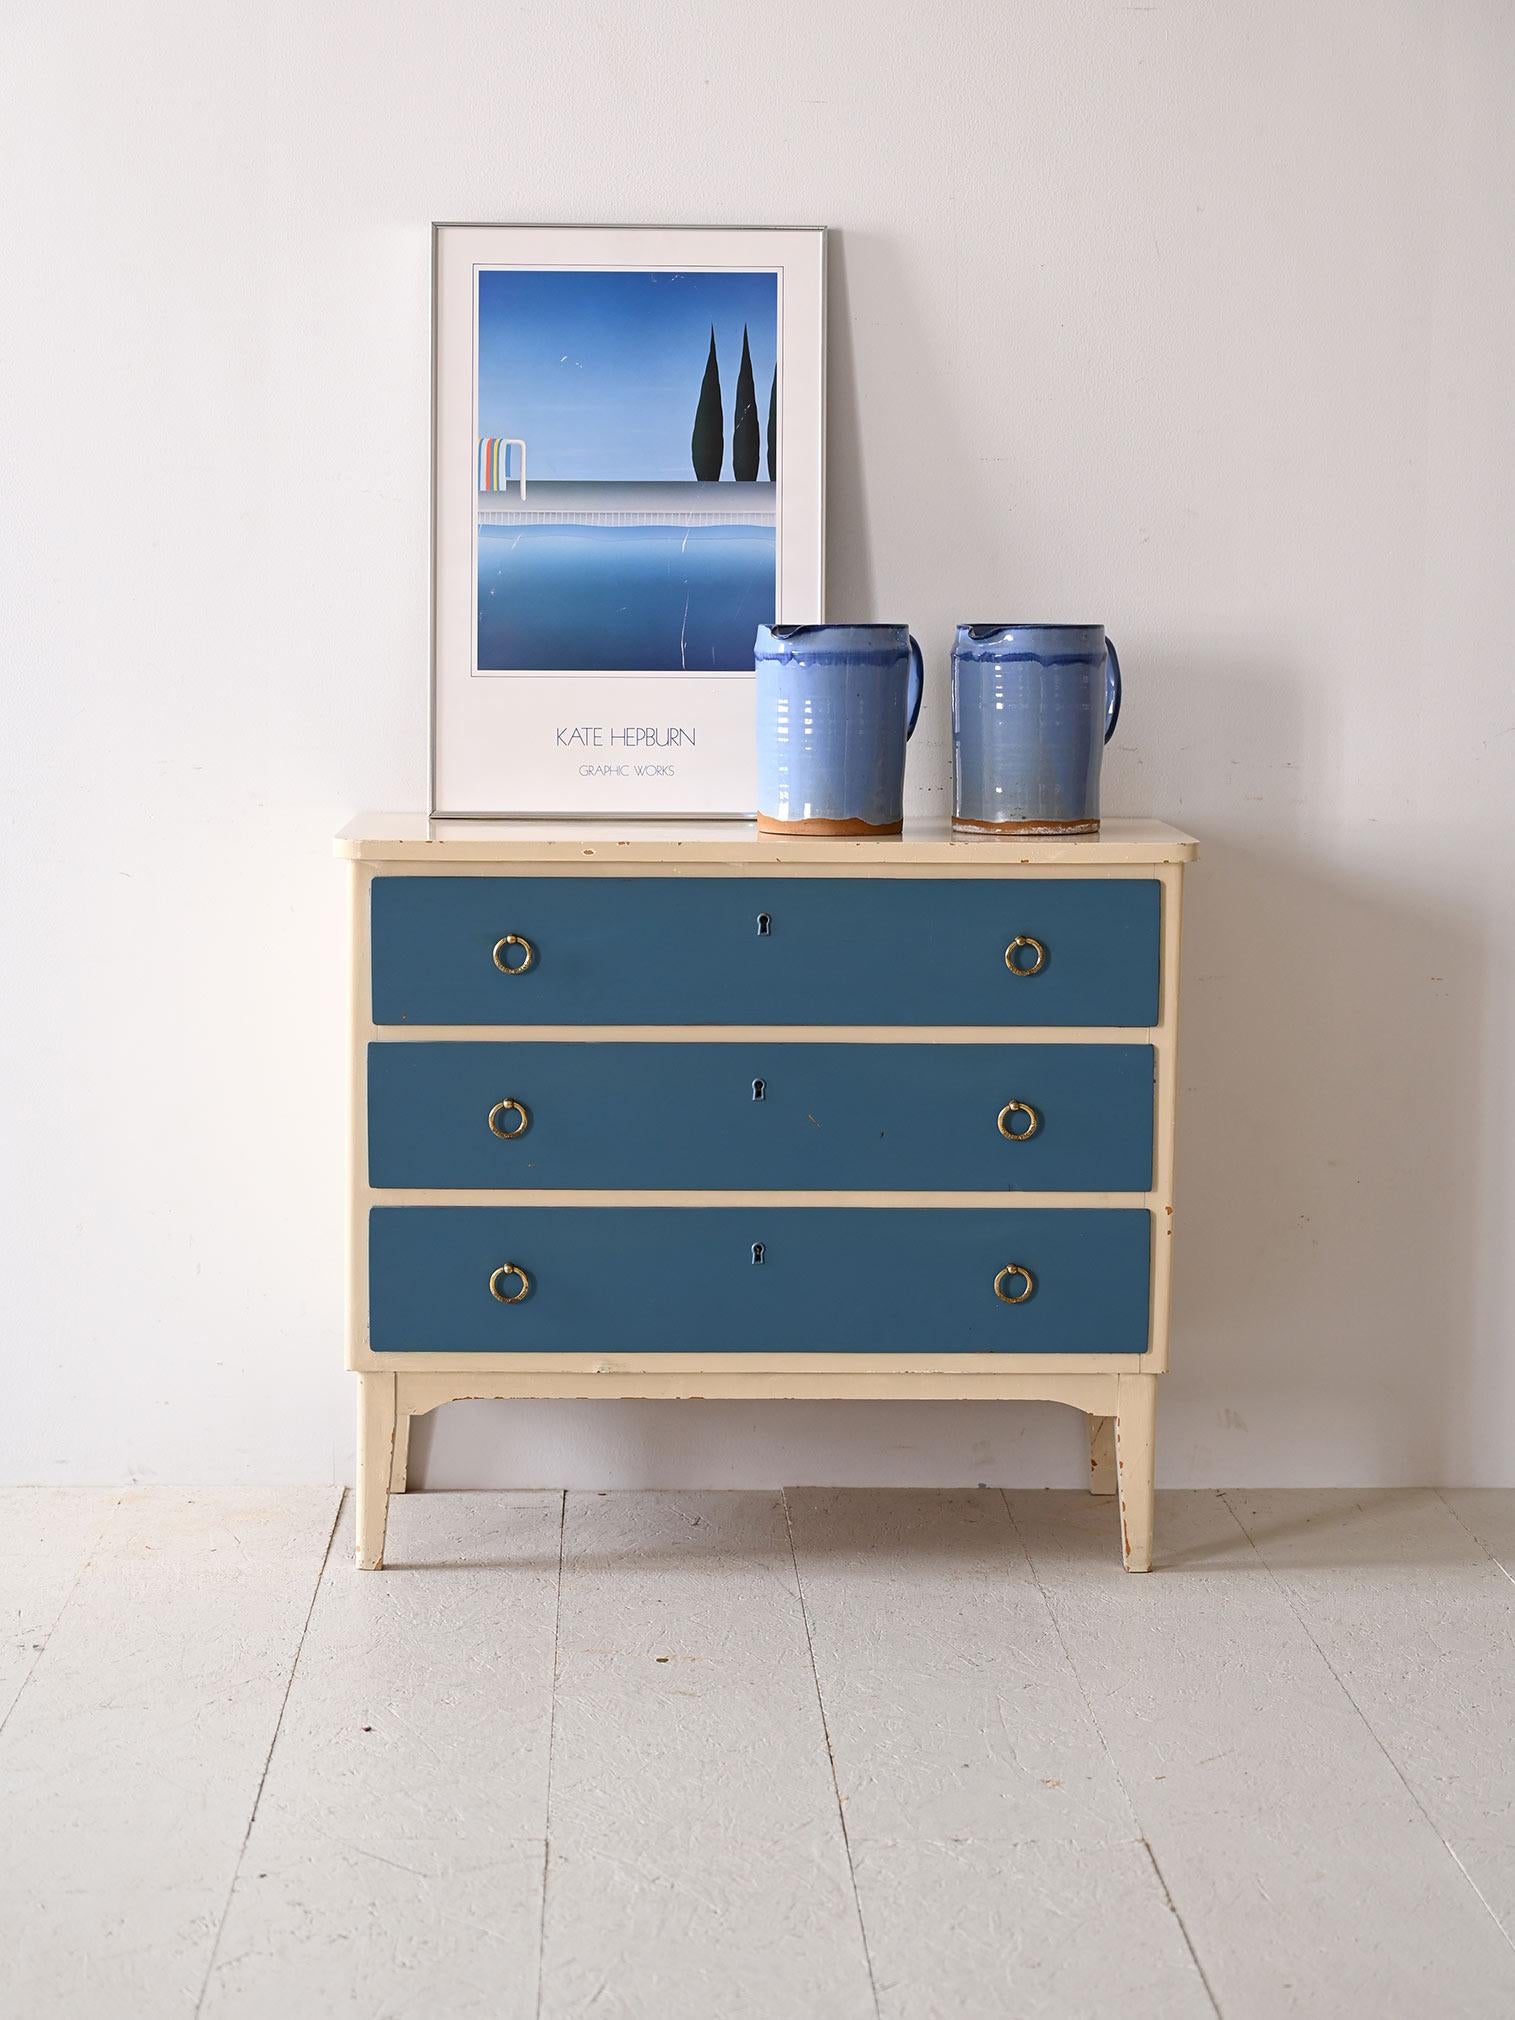 Retro cabinet with three drawers and gold metal handles.

With its vibrant shades of blue and white, this chest of drawers brings a breath of freshness and originality. Its compact silhouette, enhanced by slender Nordic-style legs, fits discreetly